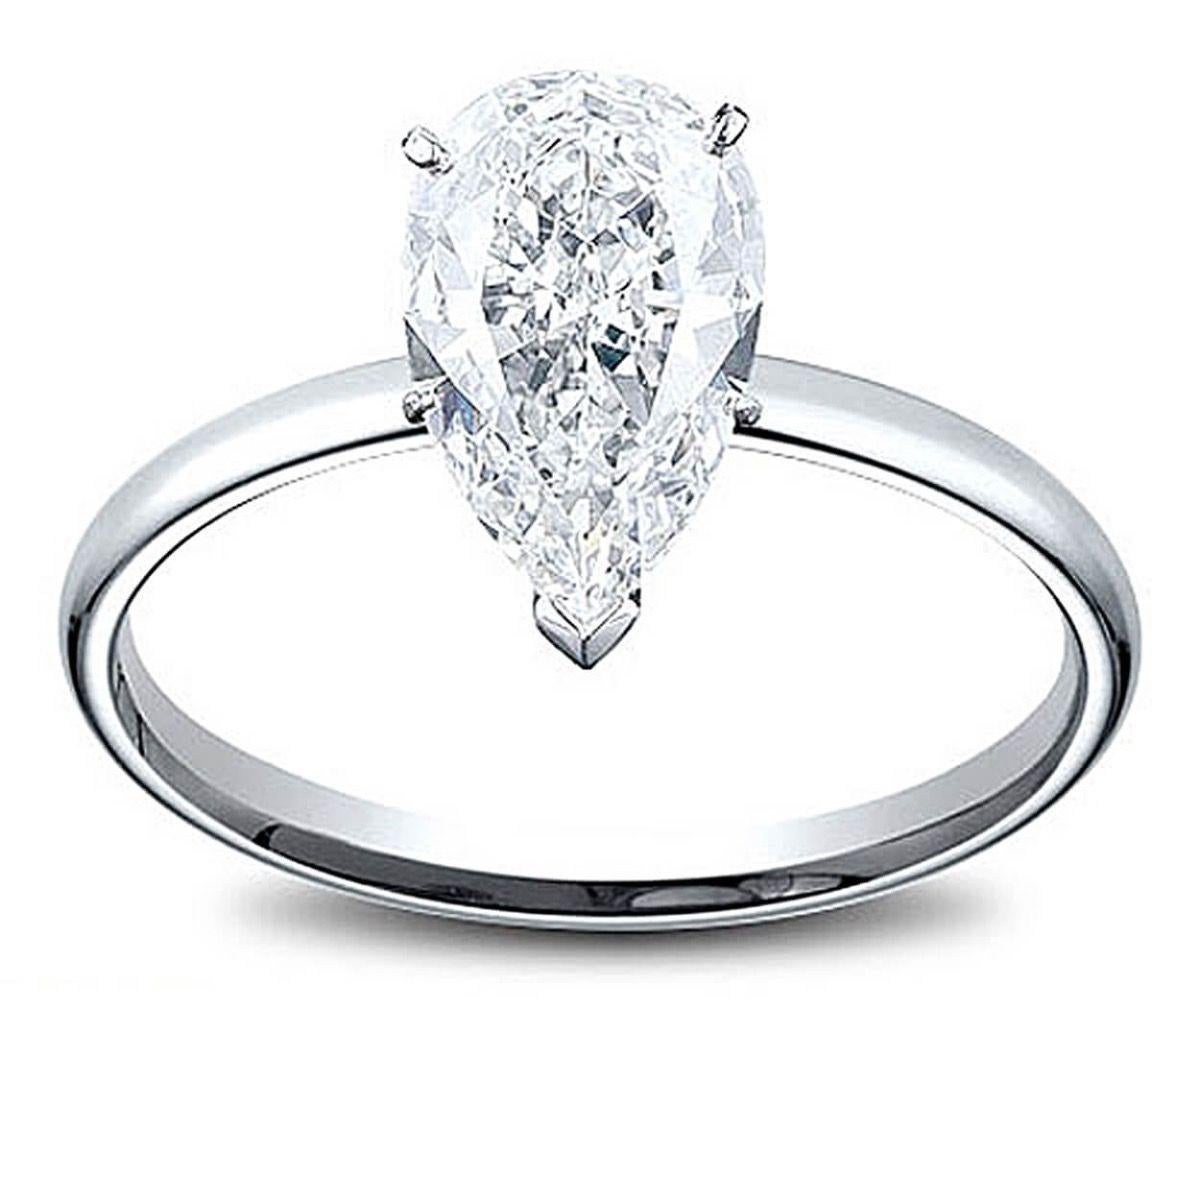 For Sale:  Made to Order GIA Certified Engagement Ring Pear Diamond Cut 3